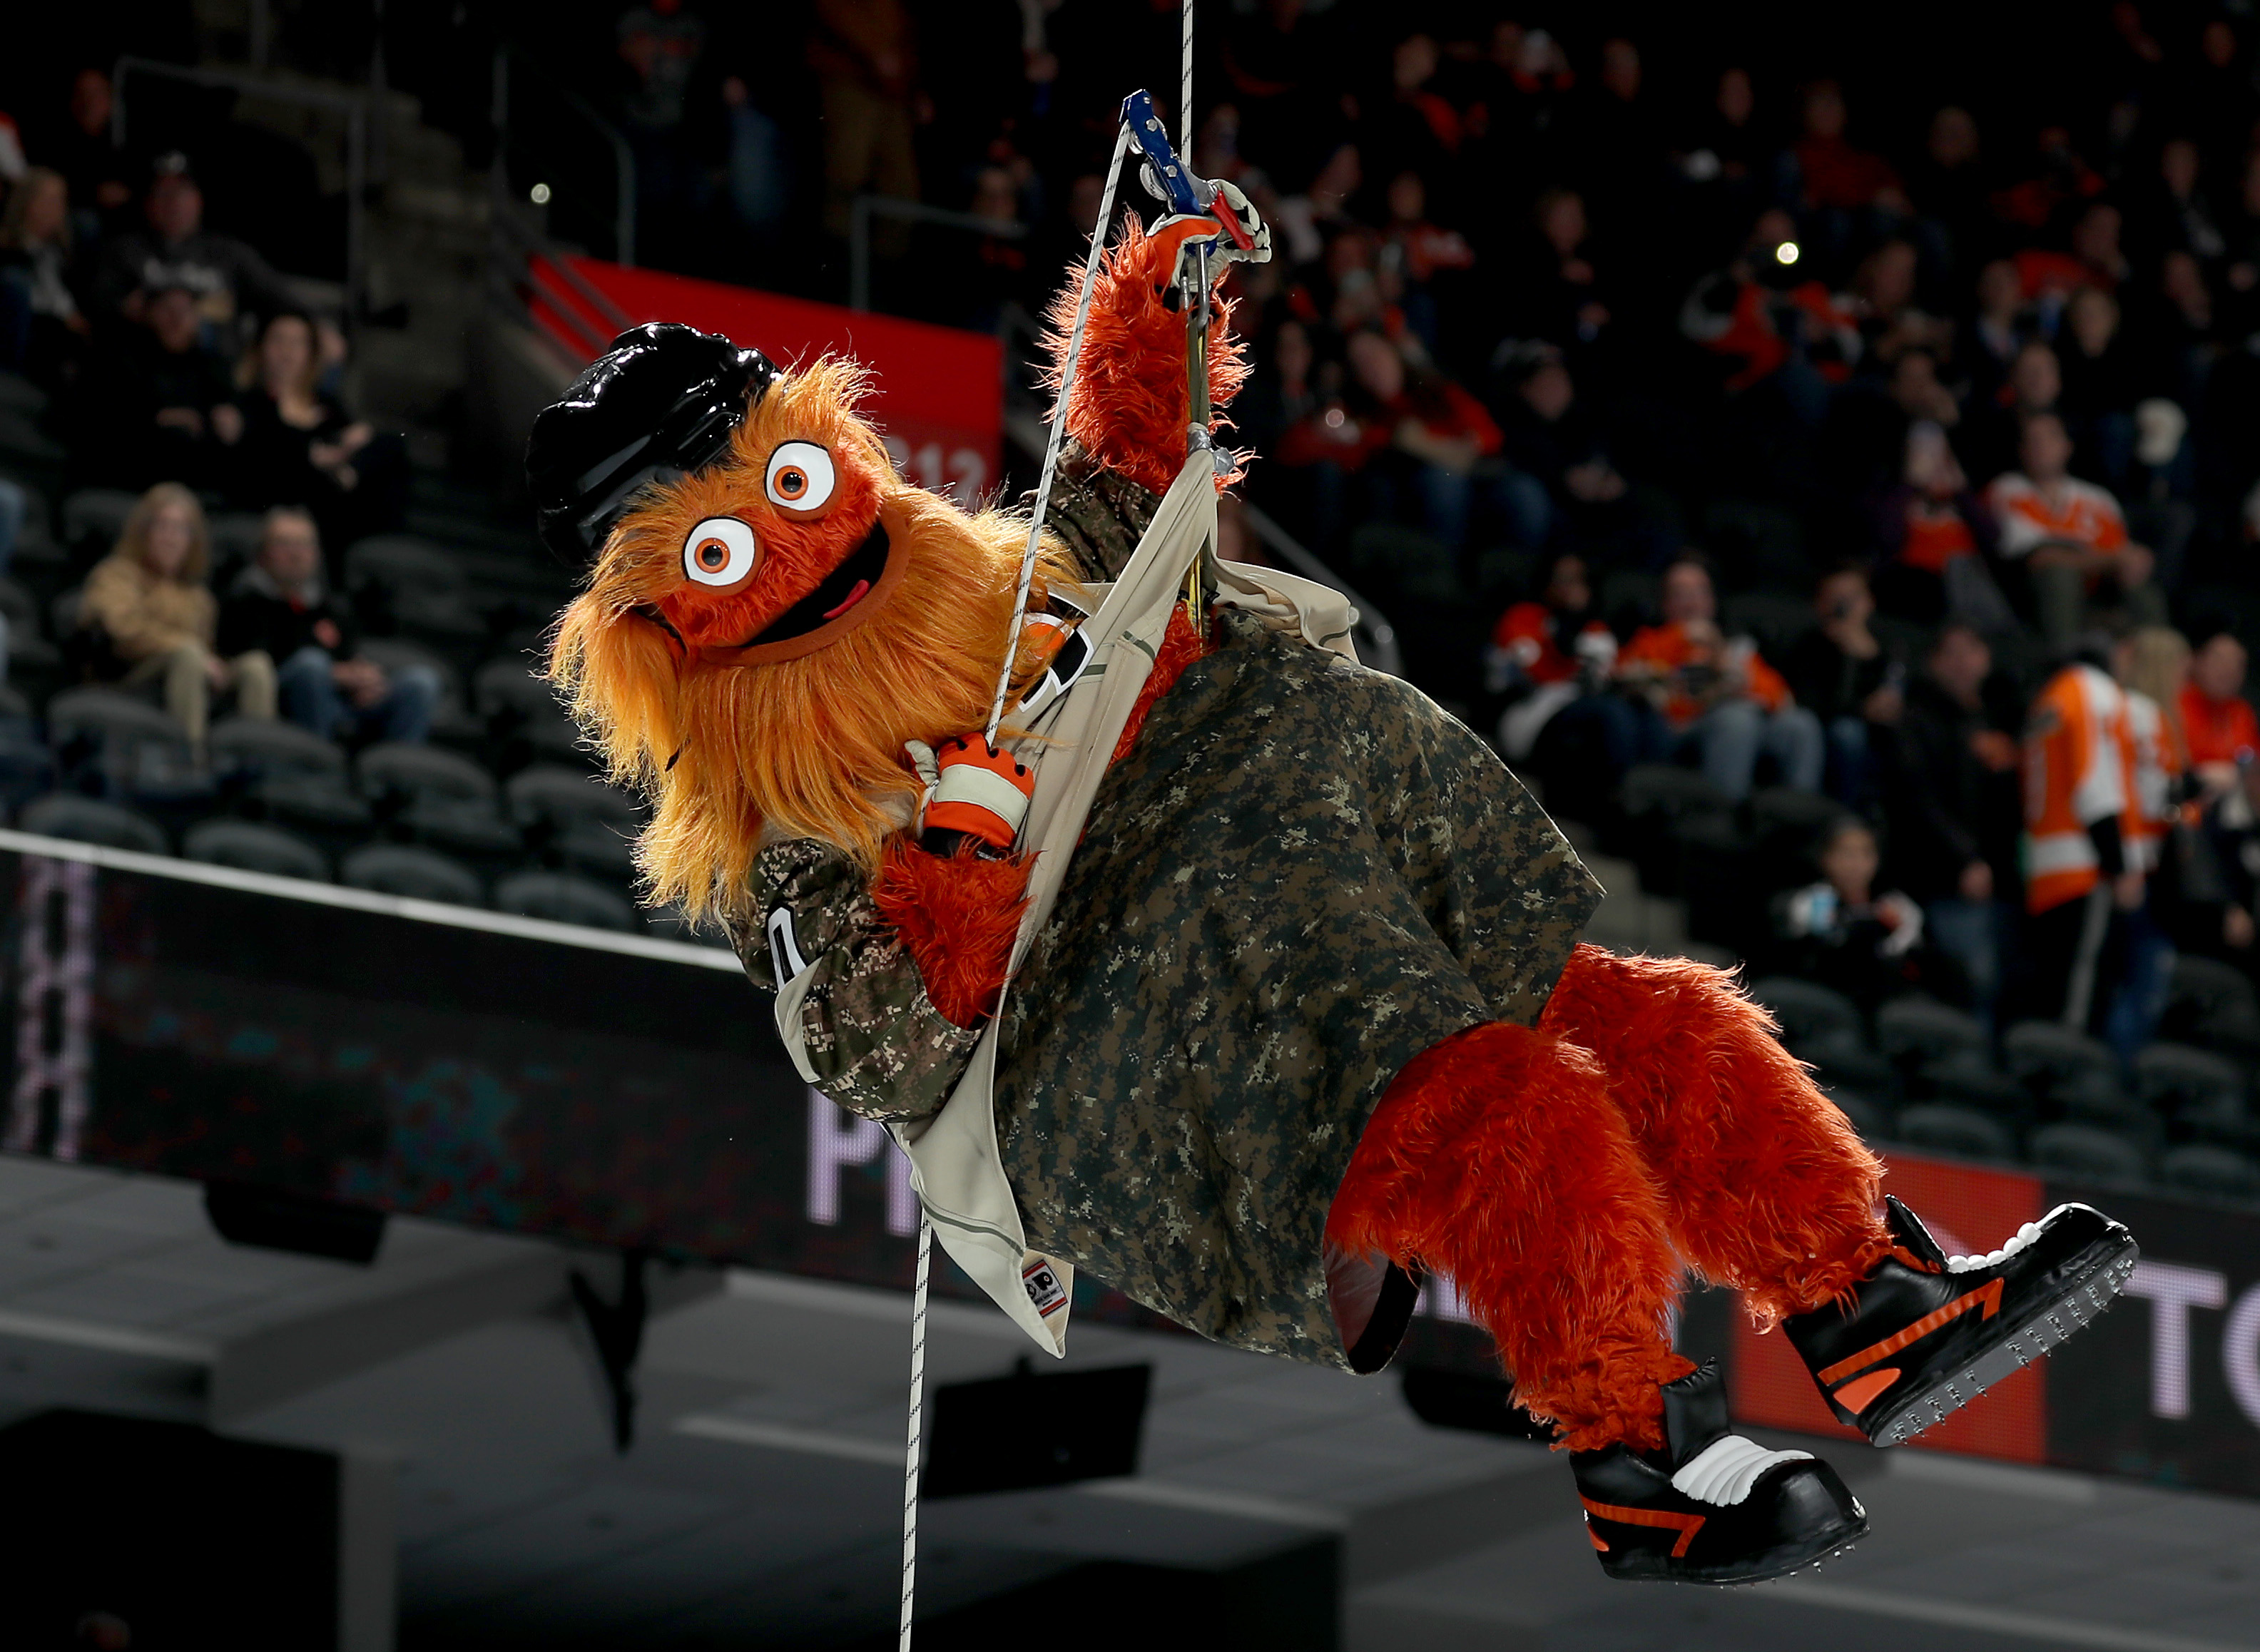 The Philadelphia Flyers mascot Gritty makes an entrance before the game between the Philadelphia Flyers and the Chicago Blackhawks at Wells Fargo Center on November 10, 2018 in Philadelphia, Pennsylvania. (Photo by Elsa/Getty Images) (Elsa&mdash;Getty Images)